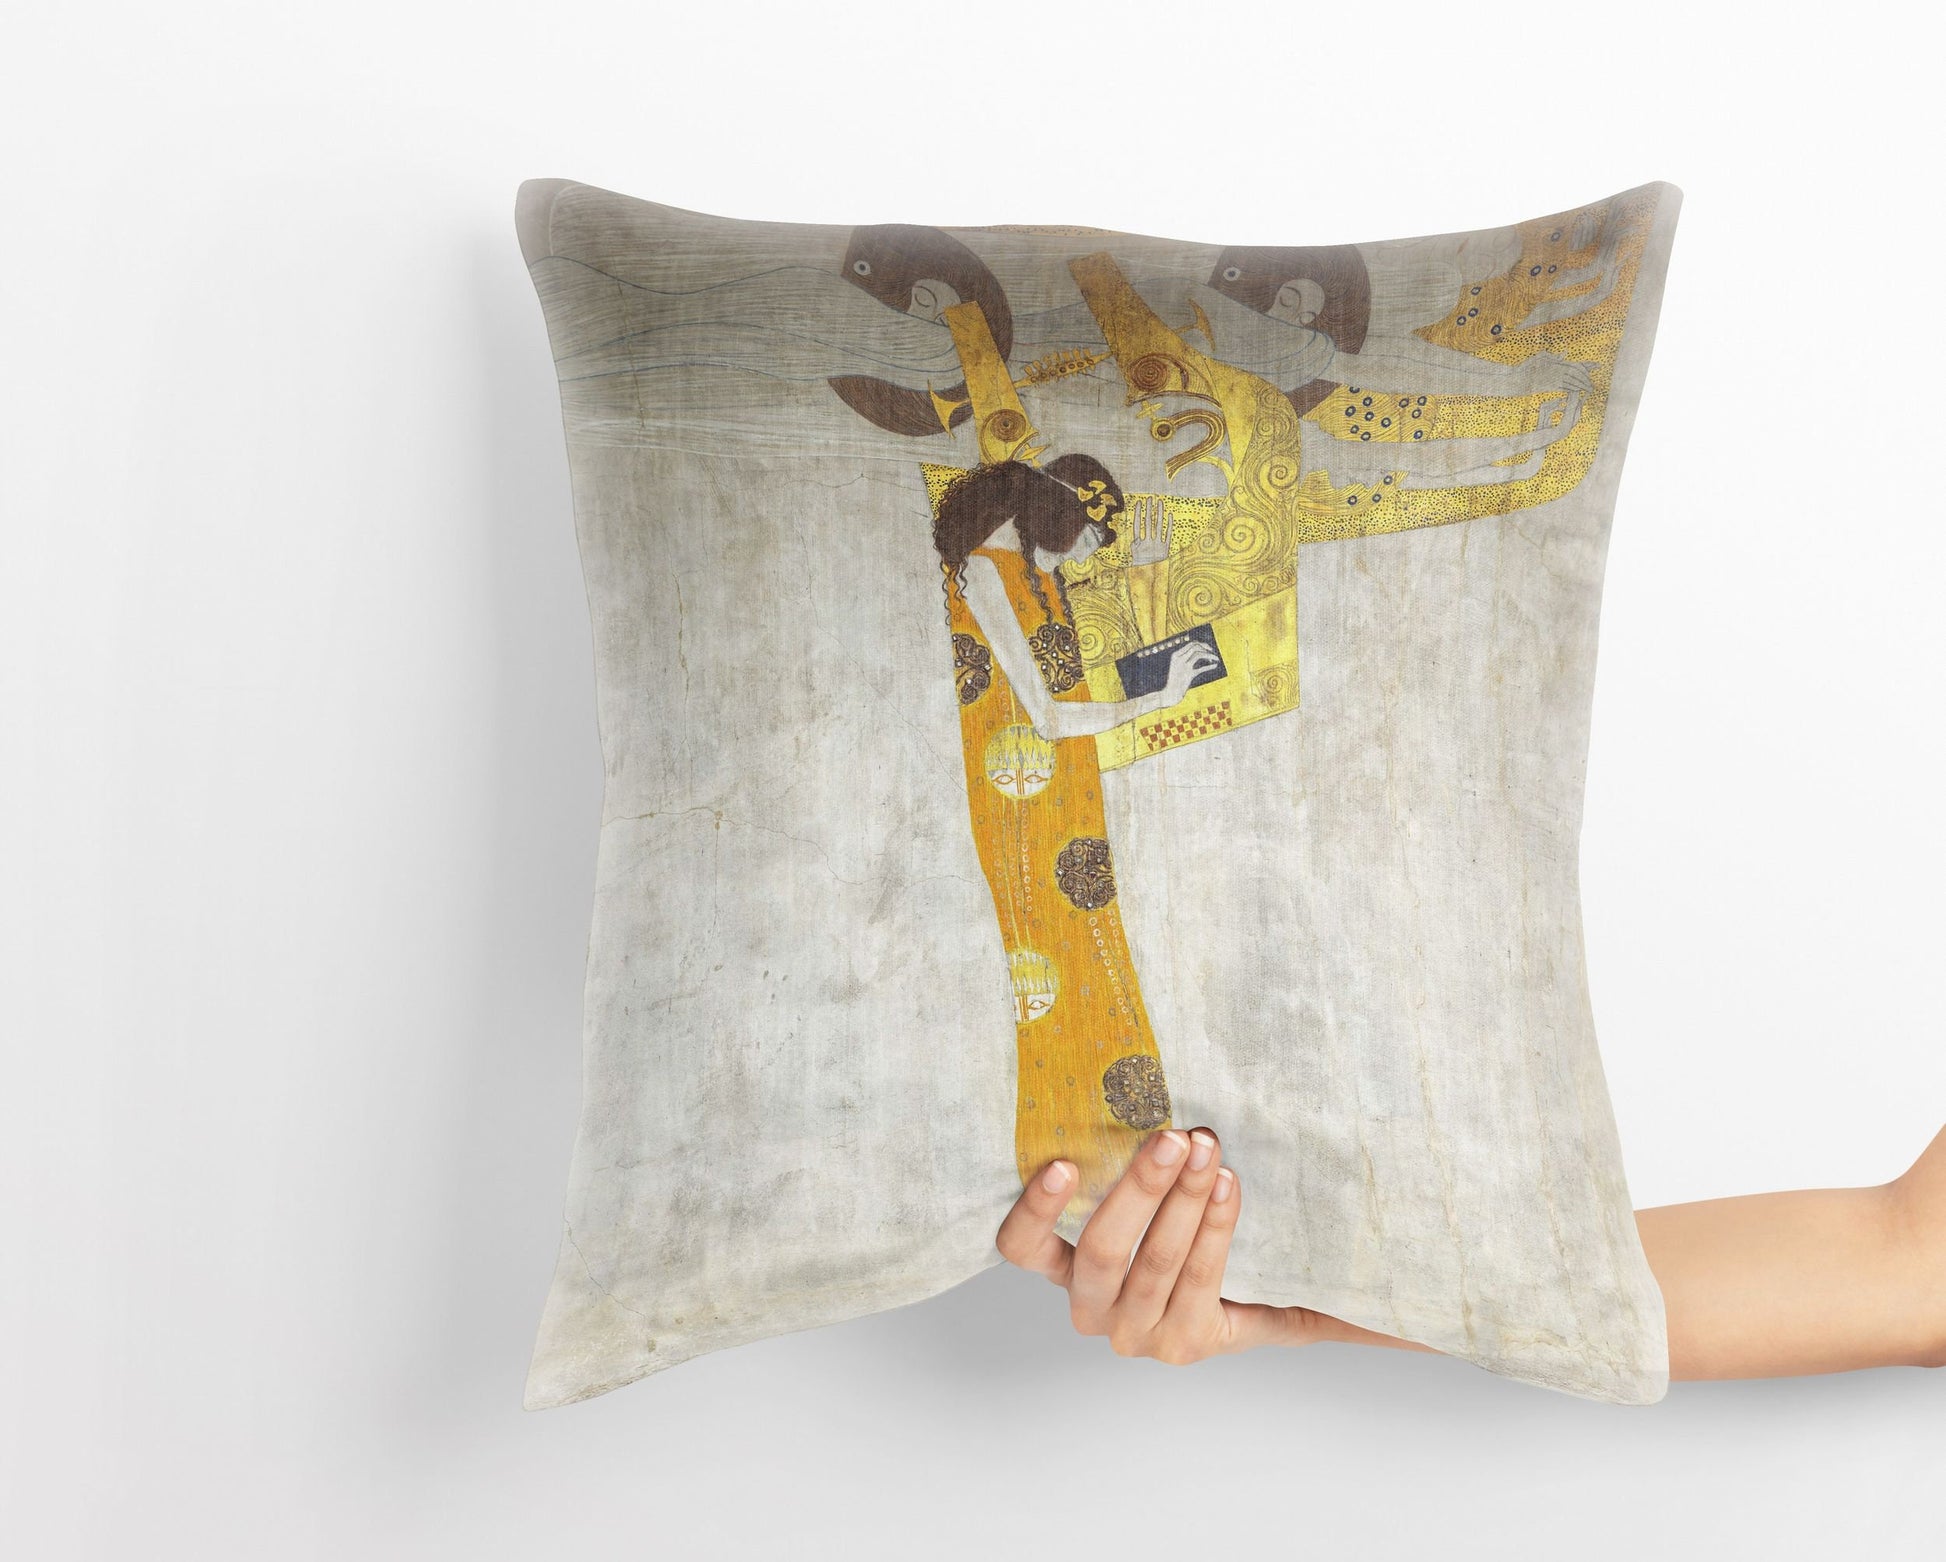 Gustav Klimt Famous Painting The Beethoven Frieze, Tapestry Pillows, Abstract Pillow, Art Pillow, Gold, Modern Pillow, Square Pillow